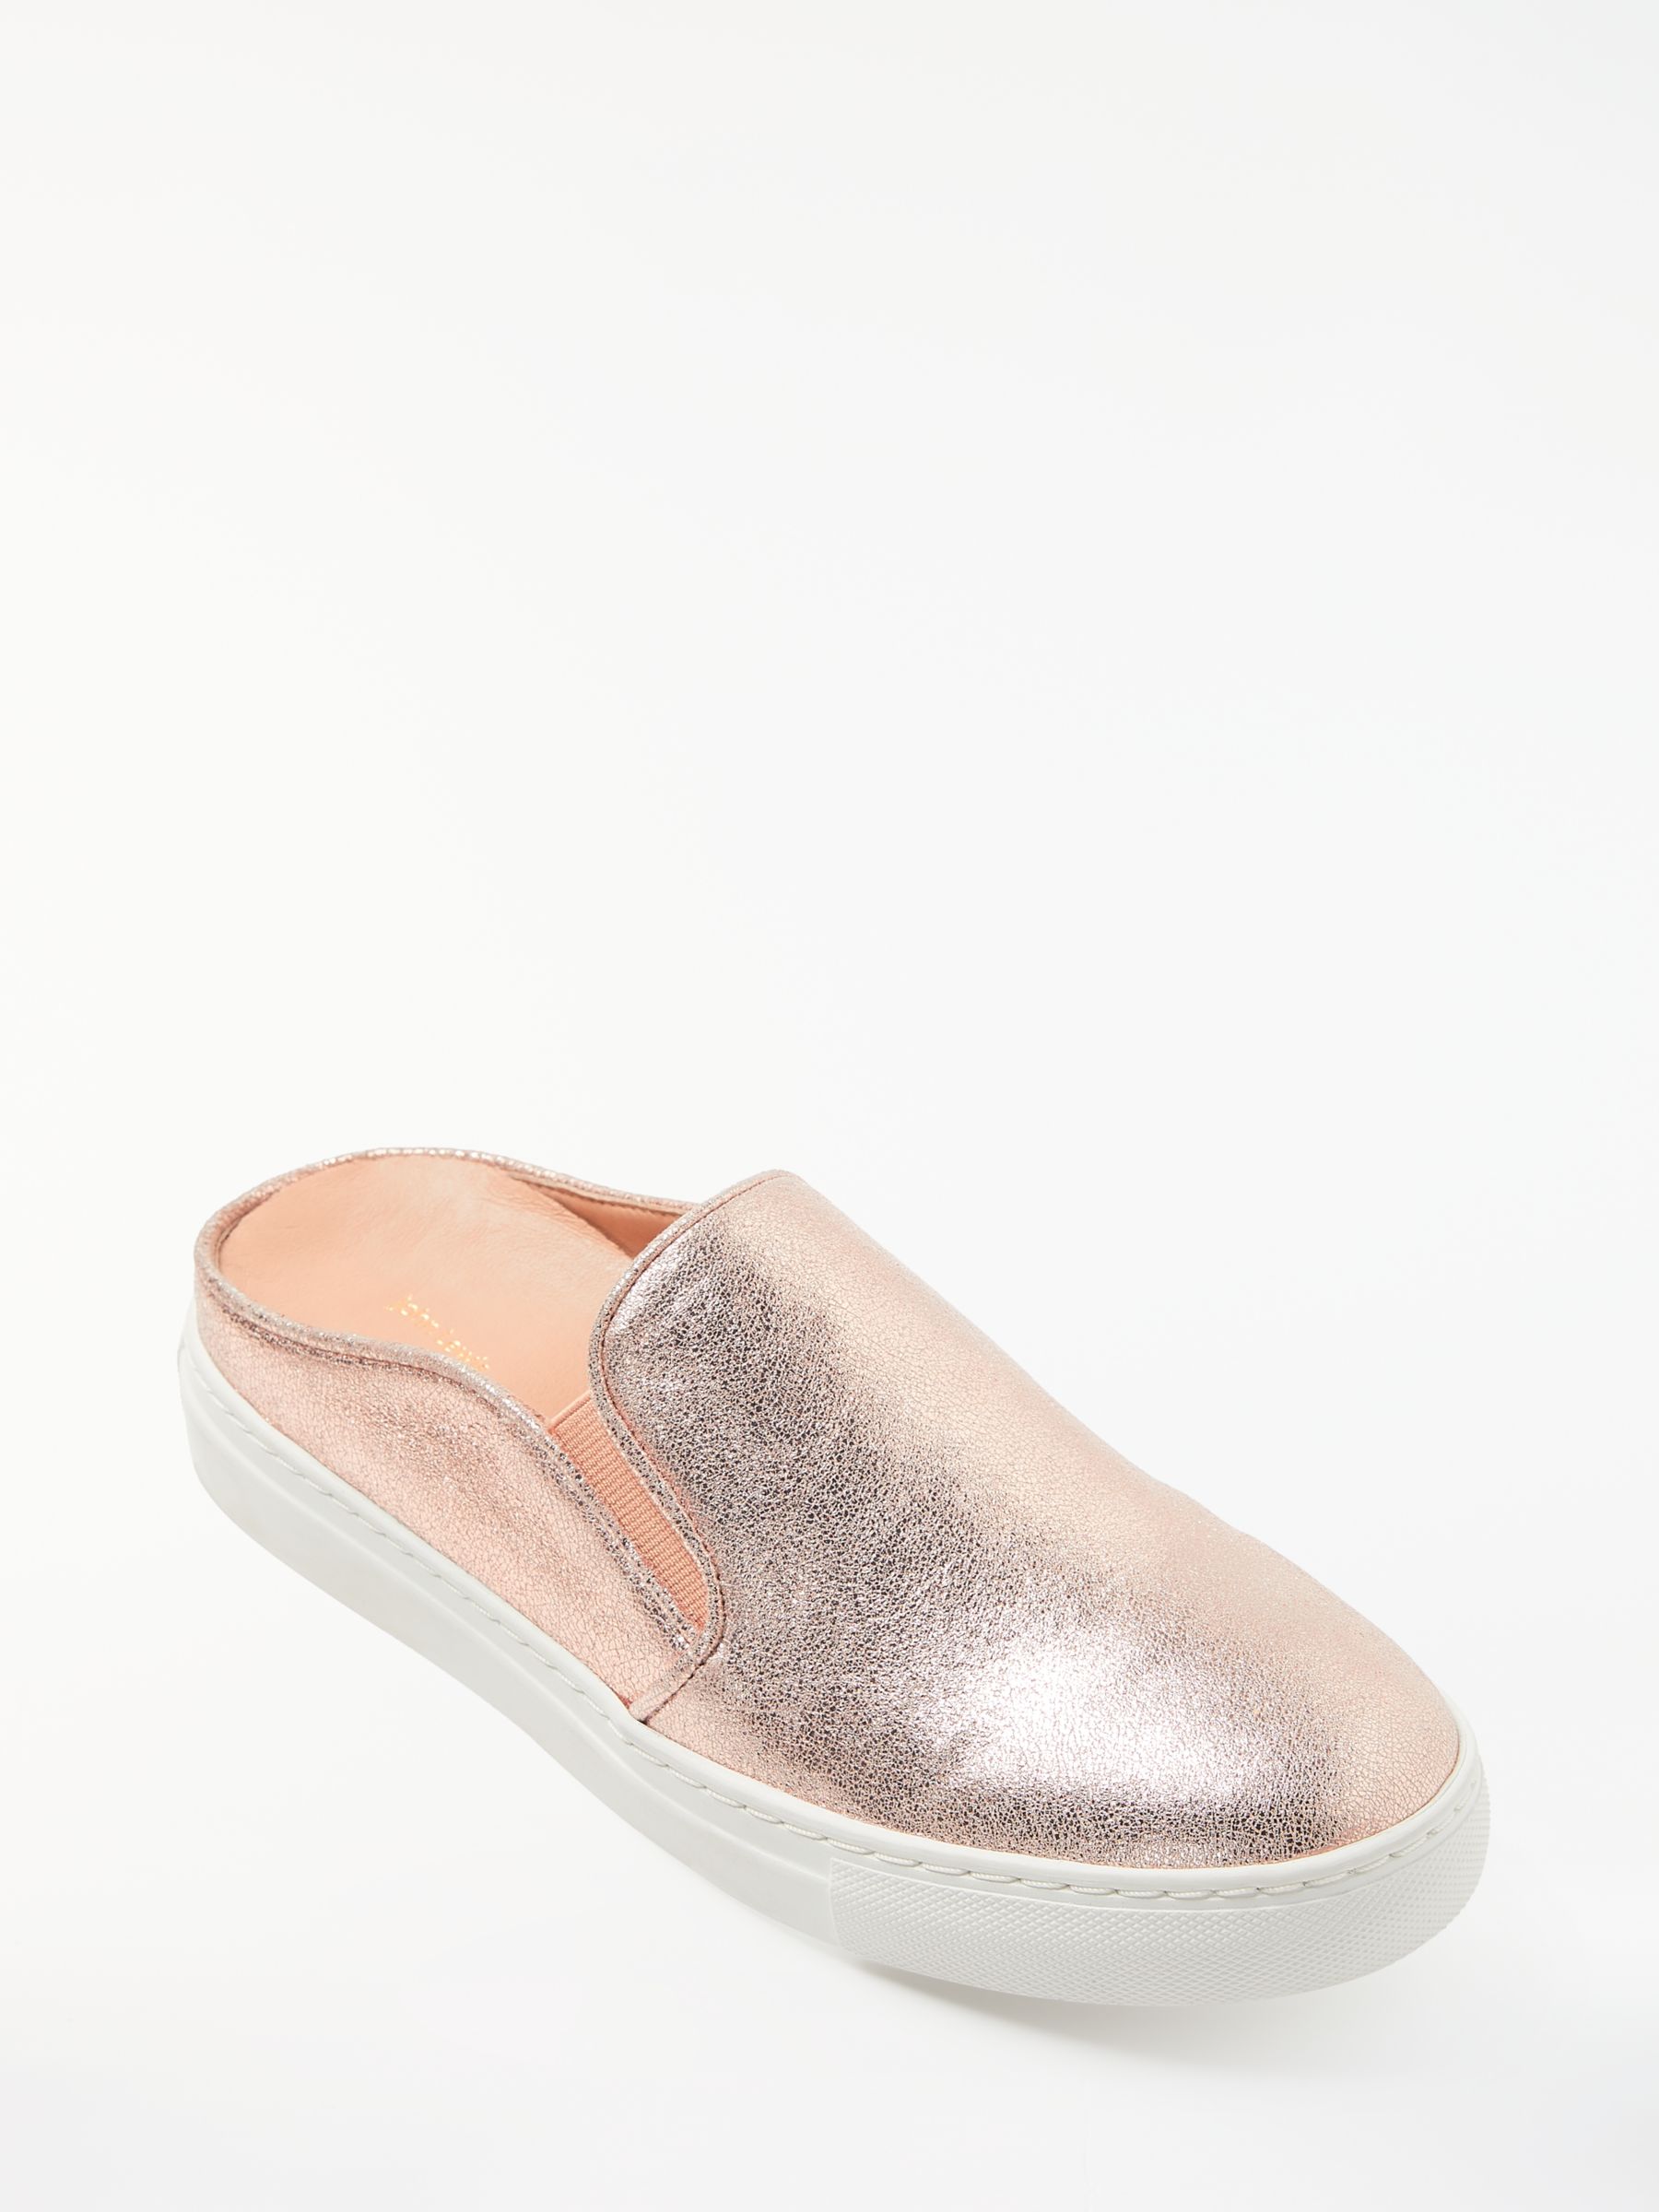 John Lewis Slip On Backless Trainers 